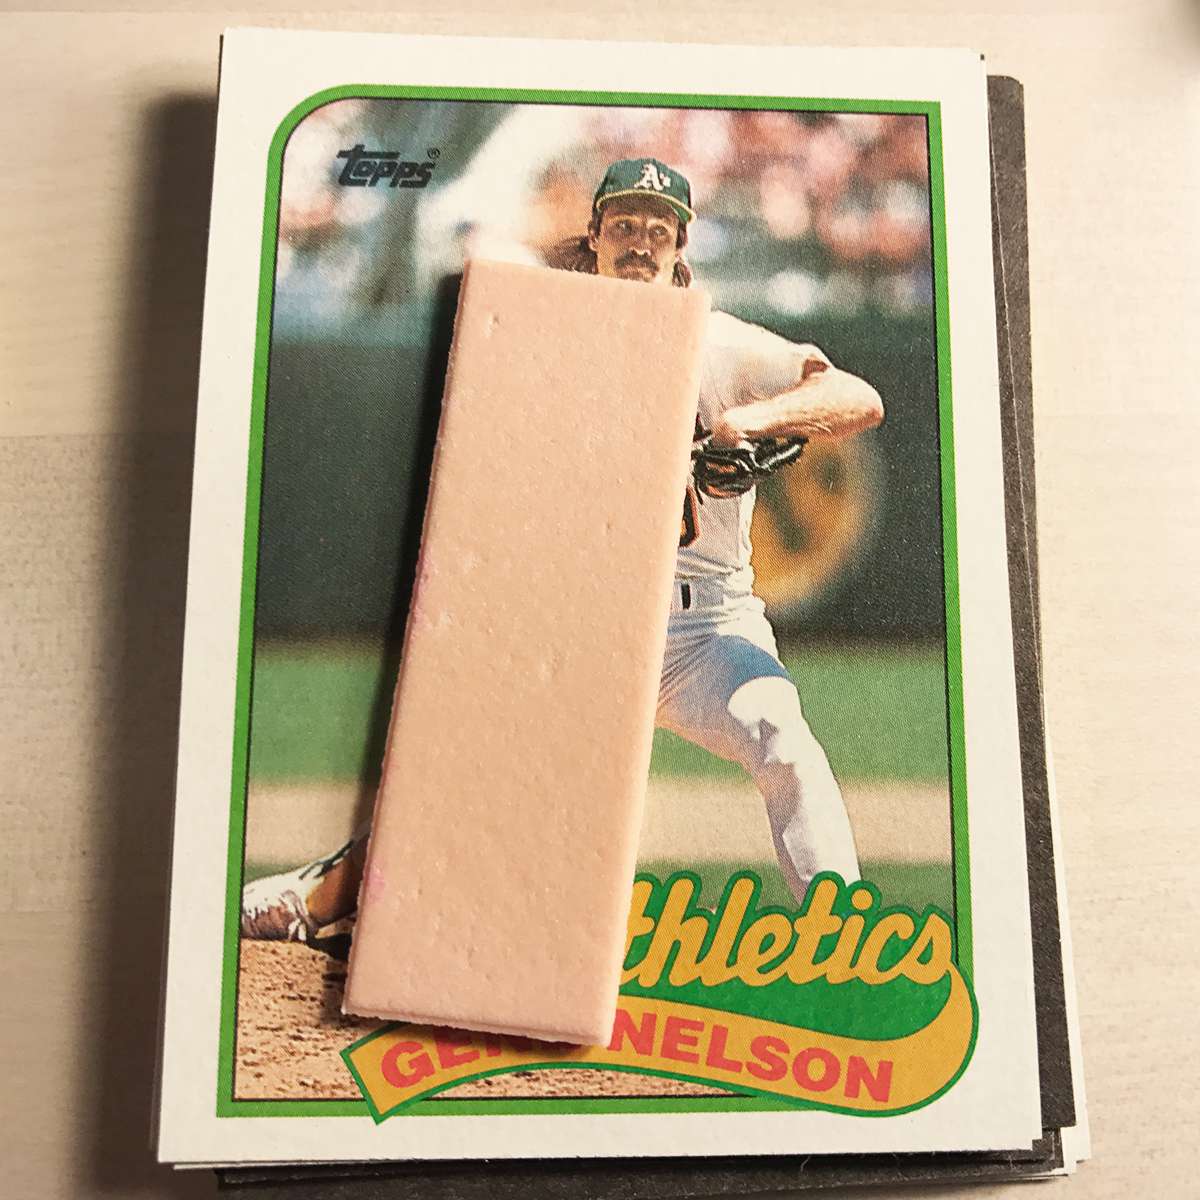 How Gum and Baseball Cards Became Intertwined | Food & Wine